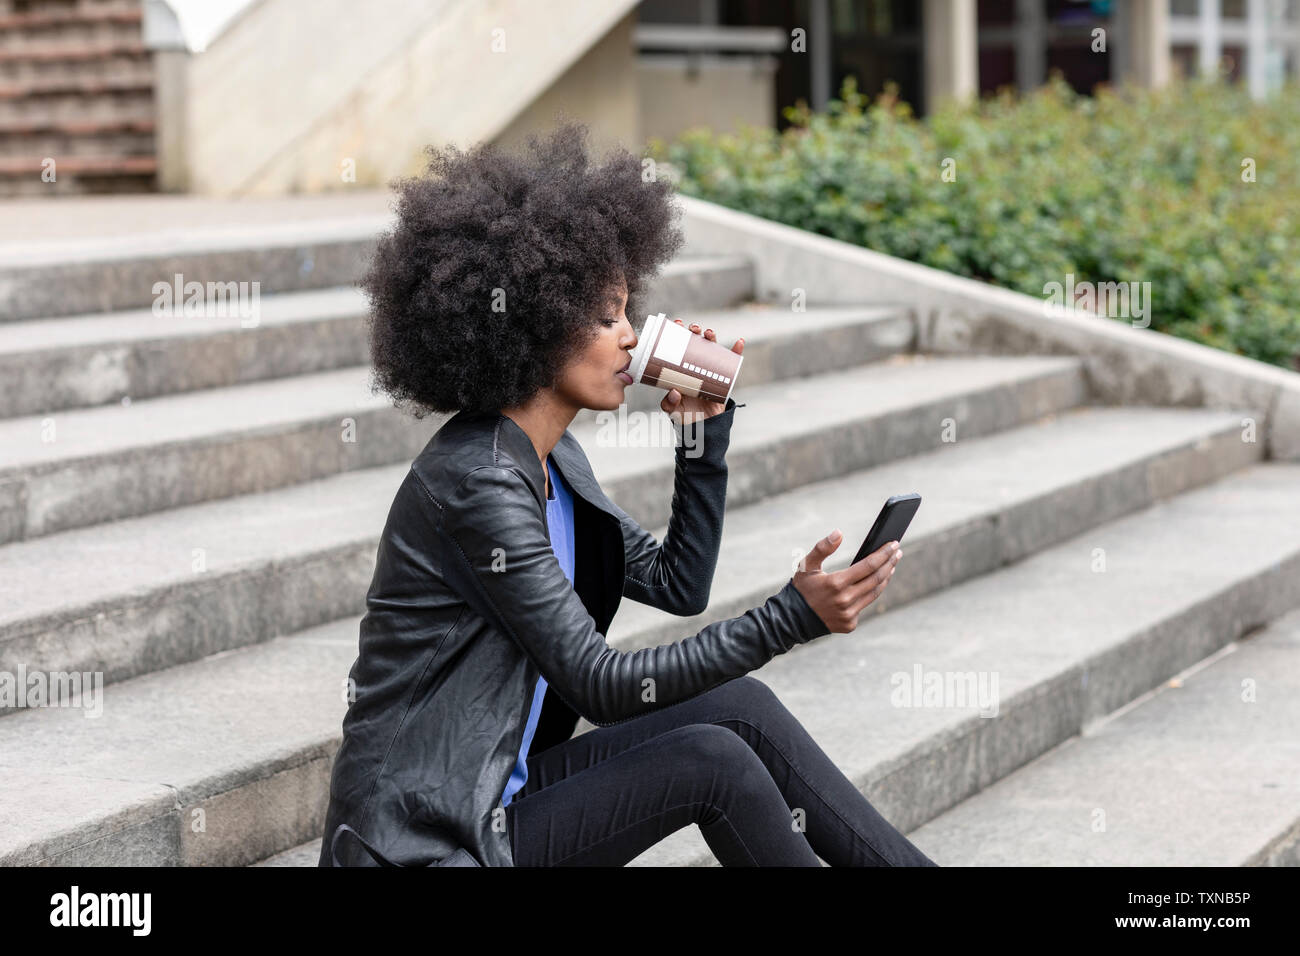 Young woman with afro hair sitting on city stairway, drinking takeaway coffee and looking at smartphone Stock Photo